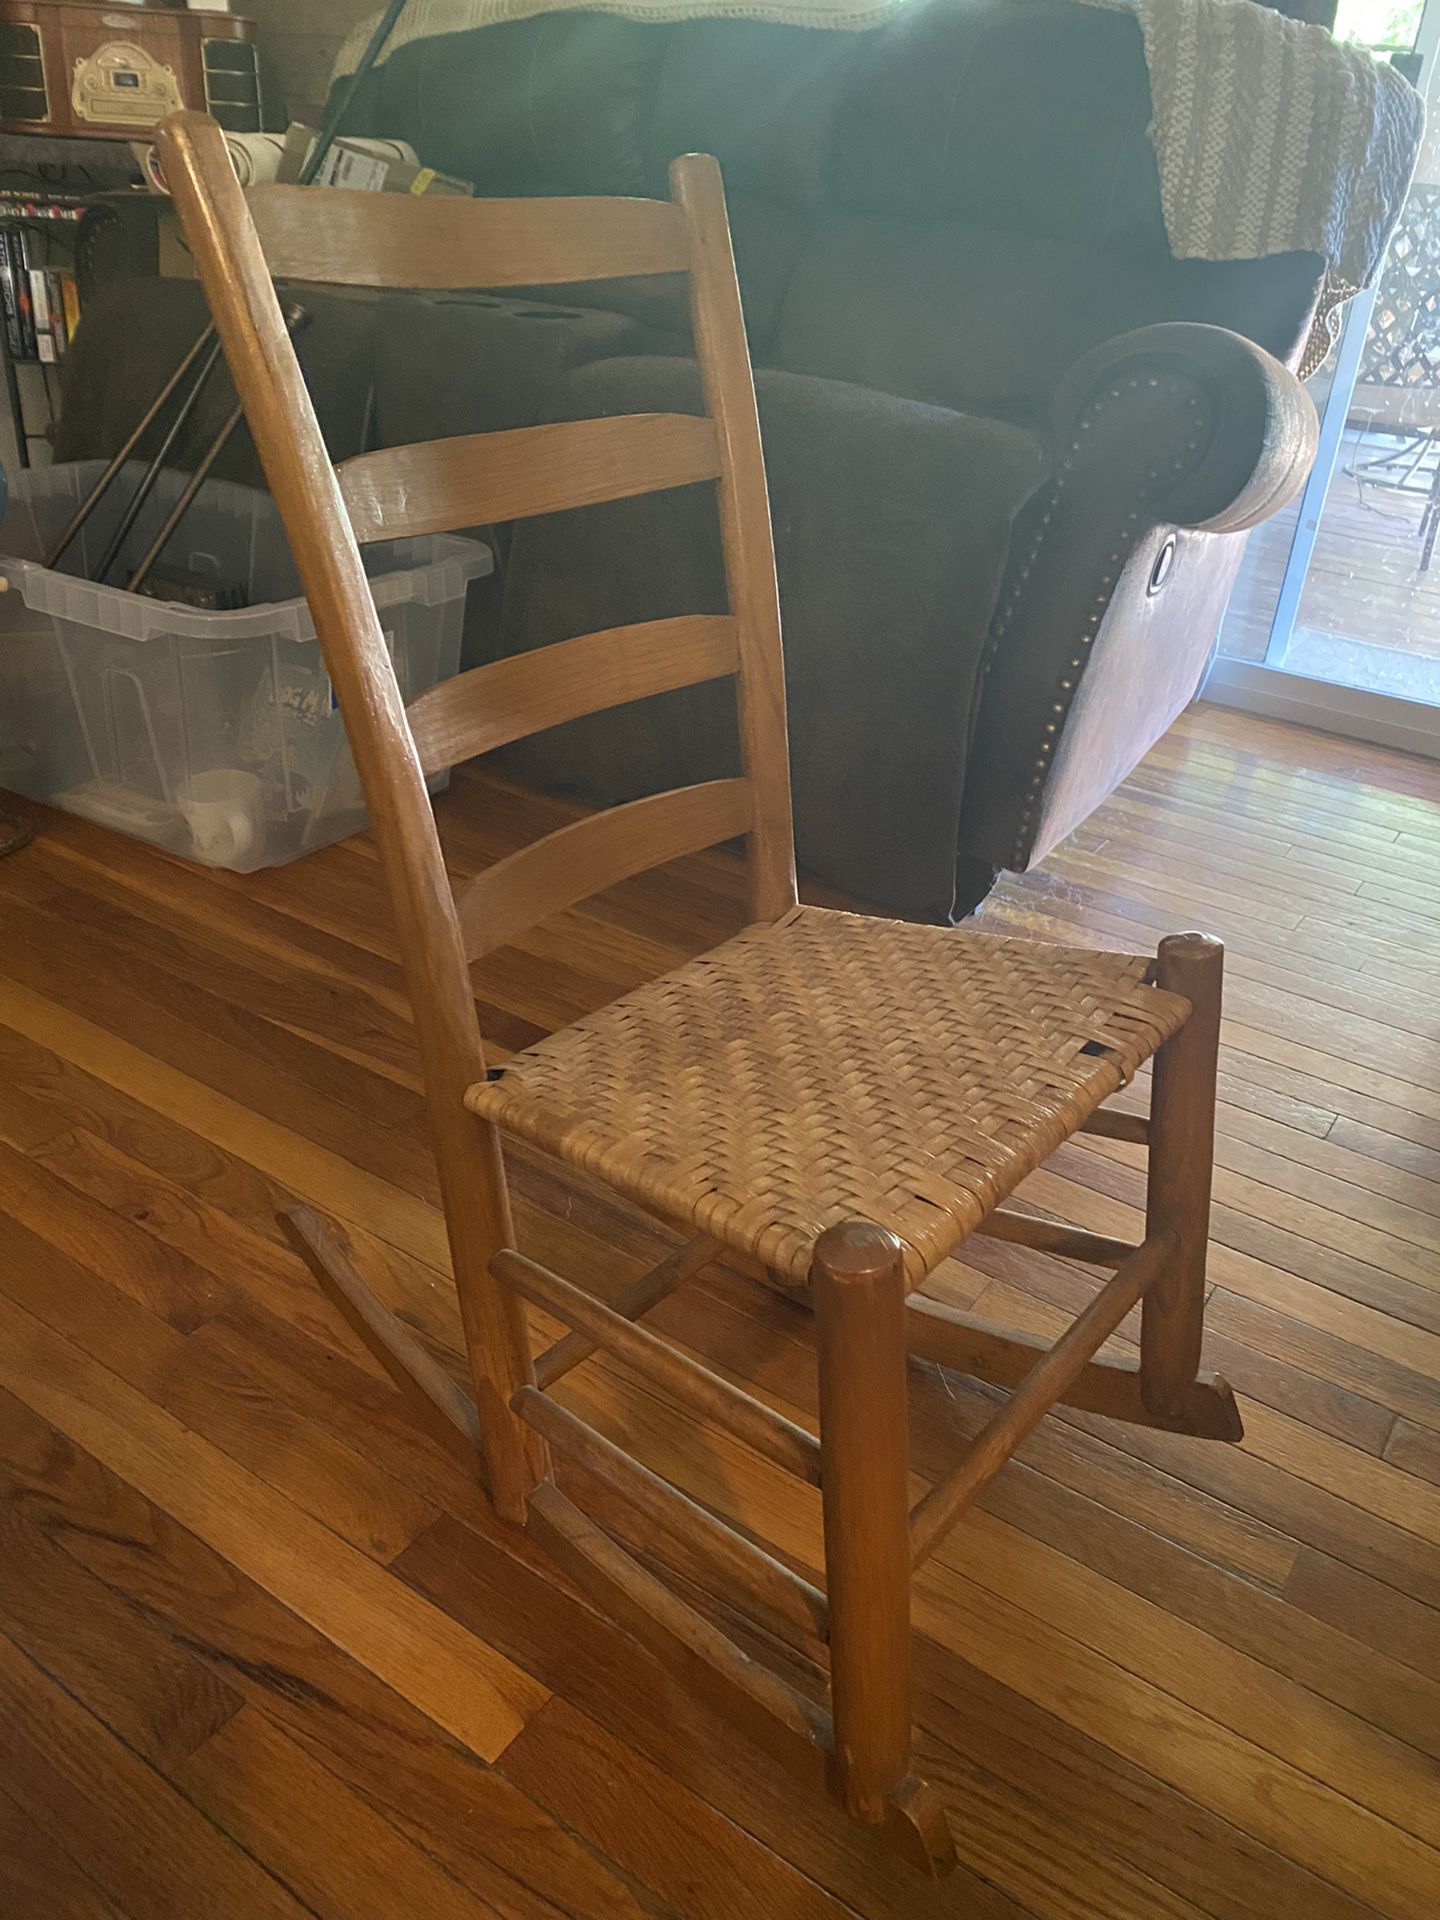 Vintage Handcrafted Child’s Rocking Chair